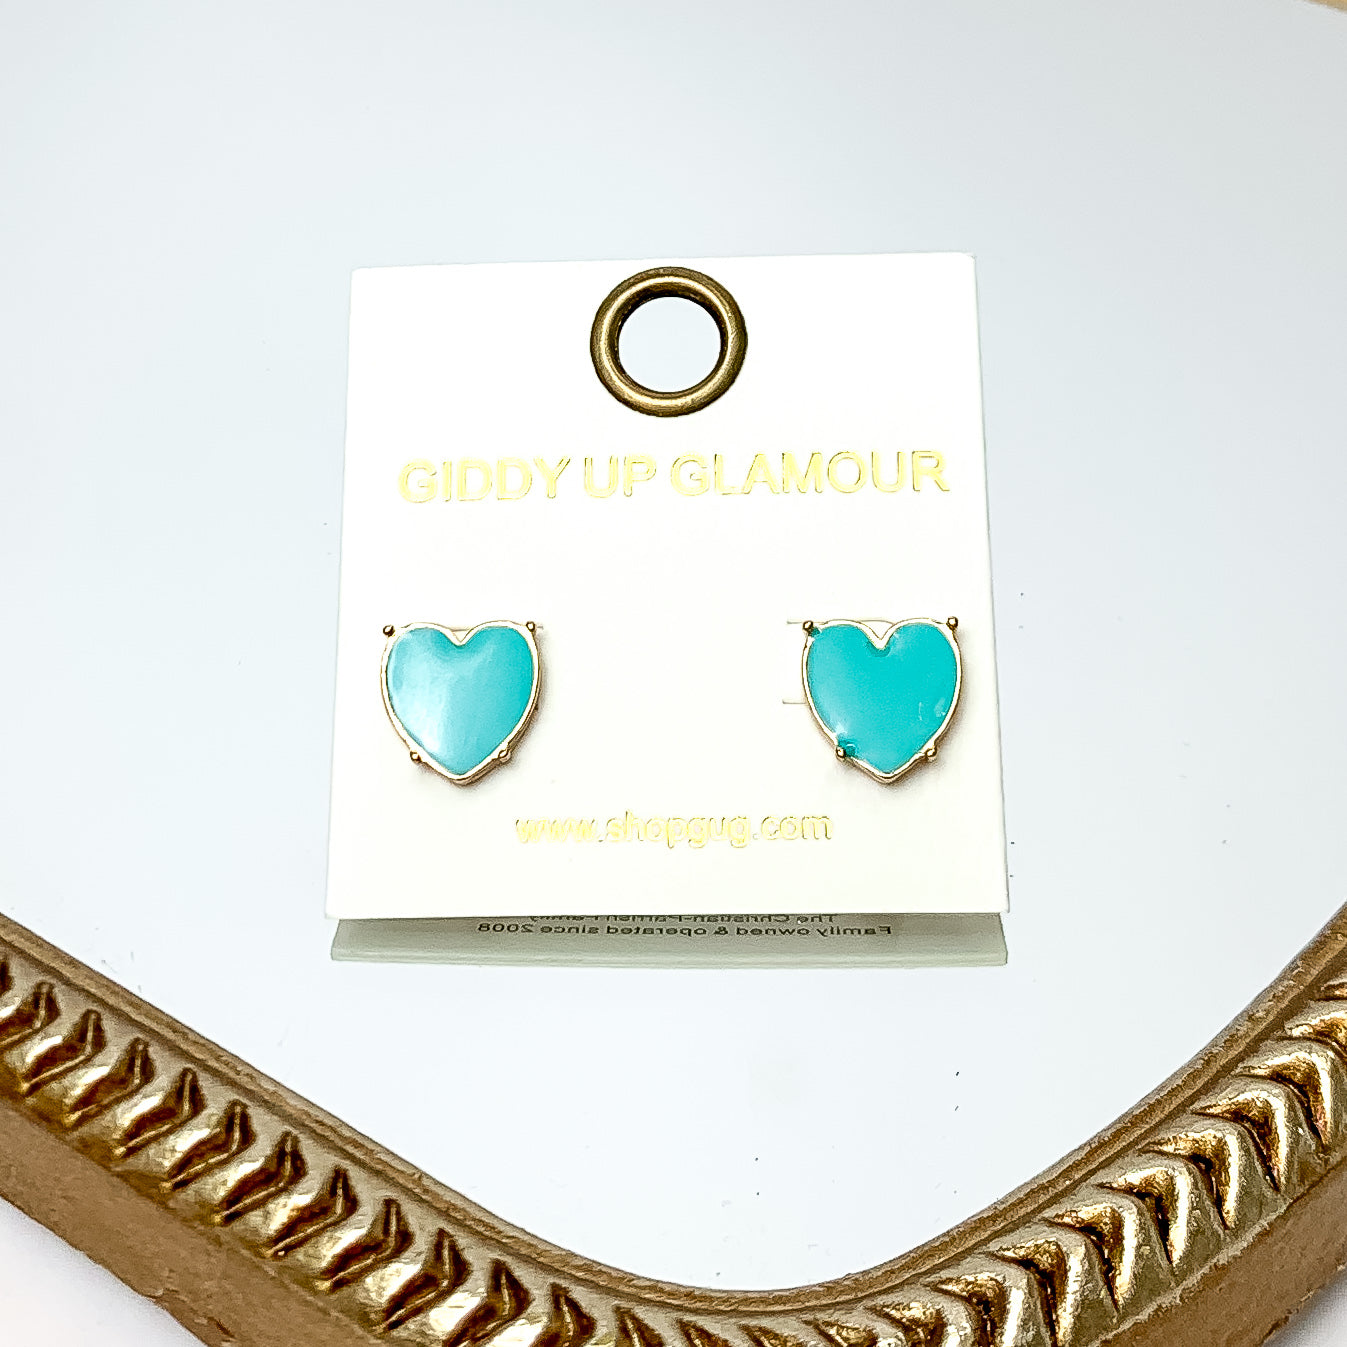 Gold Tone Heart Stud Earrings in Turquoise. These earrings are pictured on a white background with a gold frame around.